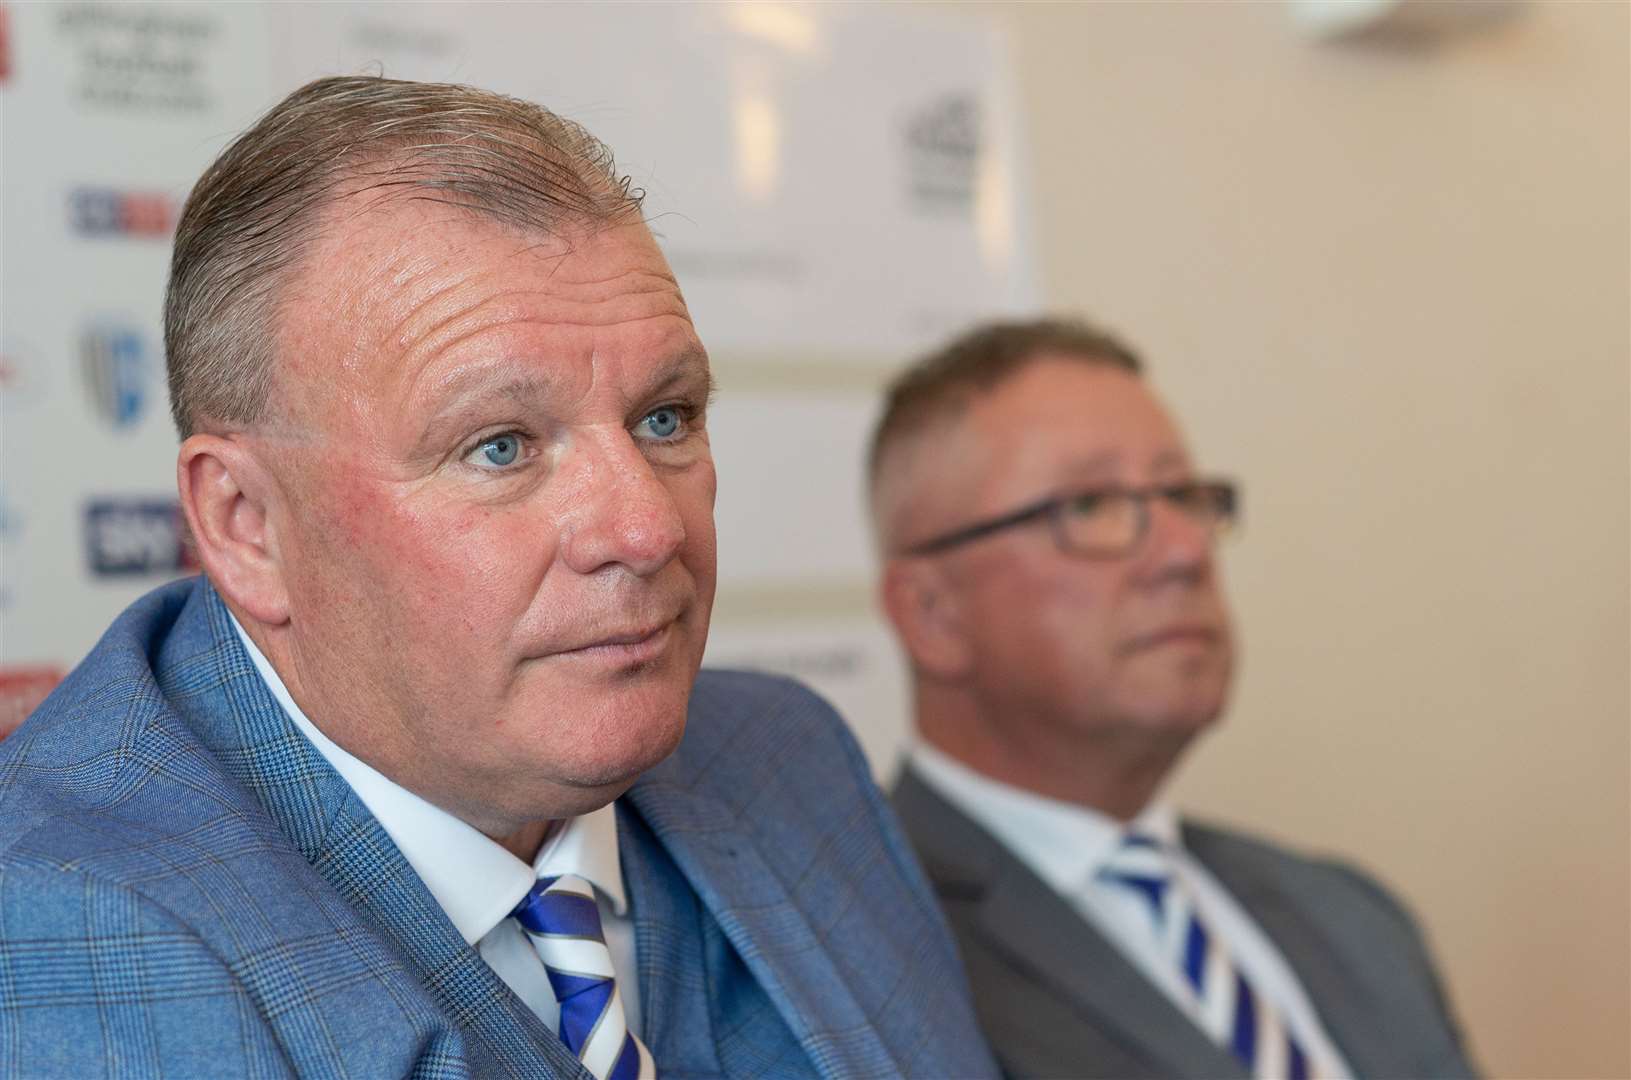 Gillingham manager Steve Evans was pleased the club kept hold of their best players on transfer deadline day